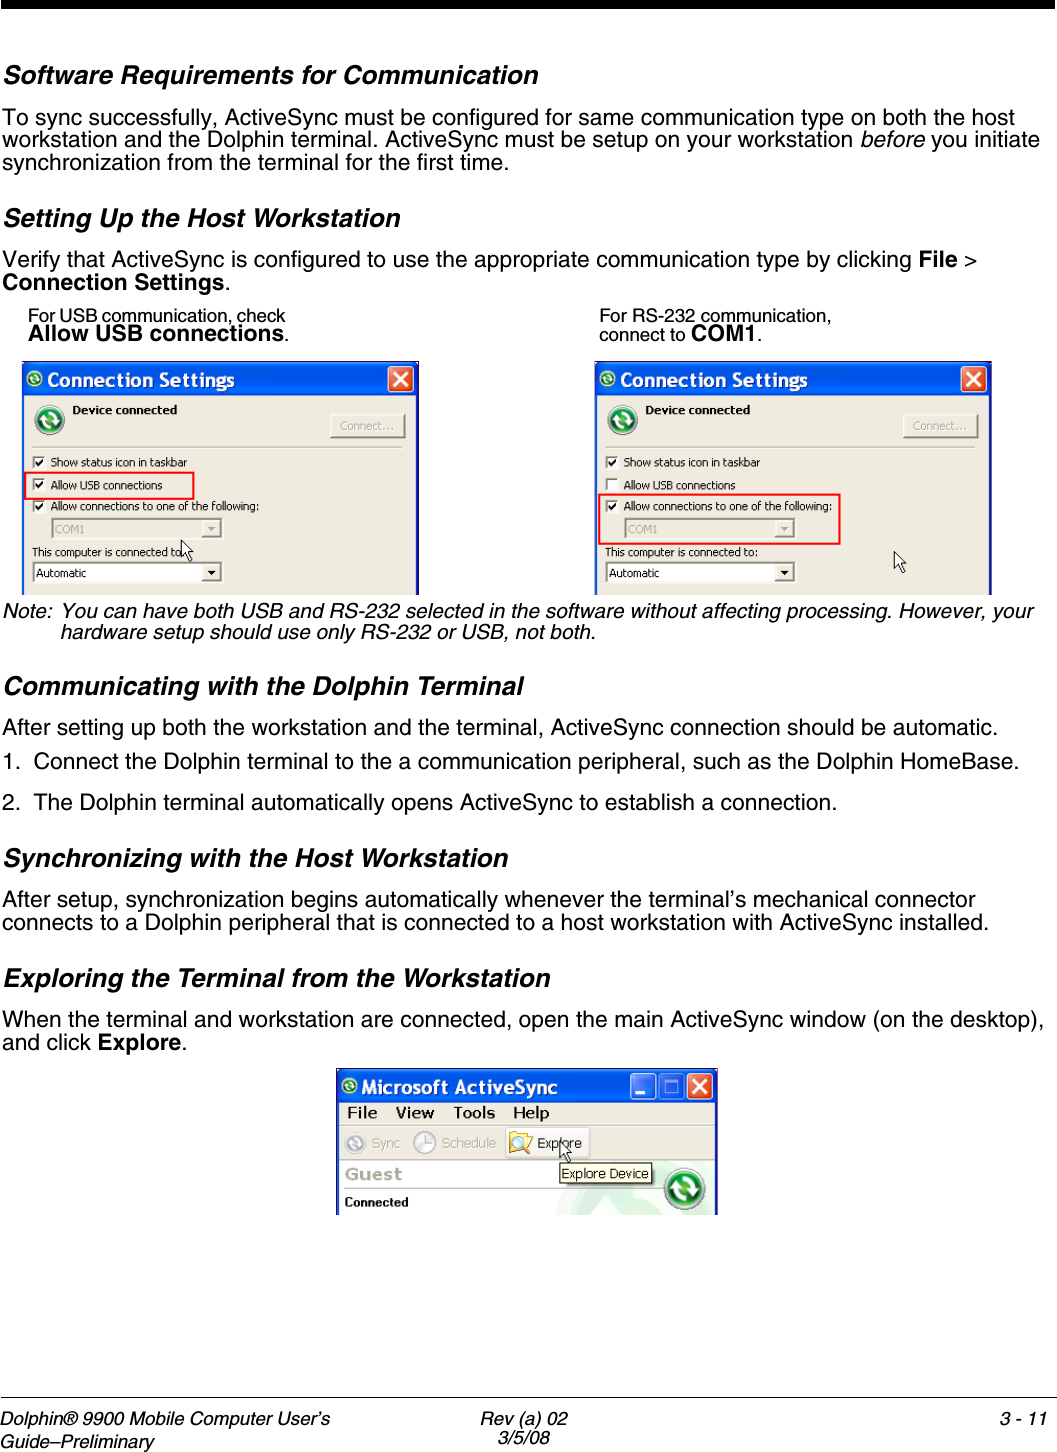 Dolphin® 9900 Mobile Computer User’s Guide–Preliminary Rev (a) 023/5/083 - 11Software Requirements for CommunicationTo sync successfully, ActiveSync must be configured for same communication type on both the host workstation and the Dolphin terminal. ActiveSync must be setup on your workstation before you initiate synchronization from the terminal for the first time.Setting Up the Host WorkstationVerify that ActiveSync is configured to use the appropriate communication type by clicking File &gt; Connection Settings.Note: You can have both USB and RS-232 selected in the software without affecting processing. However, your hardware setup should use only RS-232 or USB, not both.Communicating with the Dolphin TerminalAfter setting up both the workstation and the terminal, ActiveSync connection should be automatic.1. Connect the Dolphin terminal to the a communication peripheral, such as the Dolphin HomeBase. 2. The Dolphin terminal automatically opens ActiveSync to establish a connection.Synchronizing with the Host WorkstationAfter setup, synchronization begins automatically whenever the terminal’s mechanical connector connects to a Dolphin peripheral that is connected to a host workstation with ActiveSync installed. Exploring the Terminal from the WorkstationWhen the terminal and workstation are connected, open the main ActiveSync window (on the desktop), and click Explore.For USB communication, check Allow USB connections.For RS-232 communication, connect to COM1.